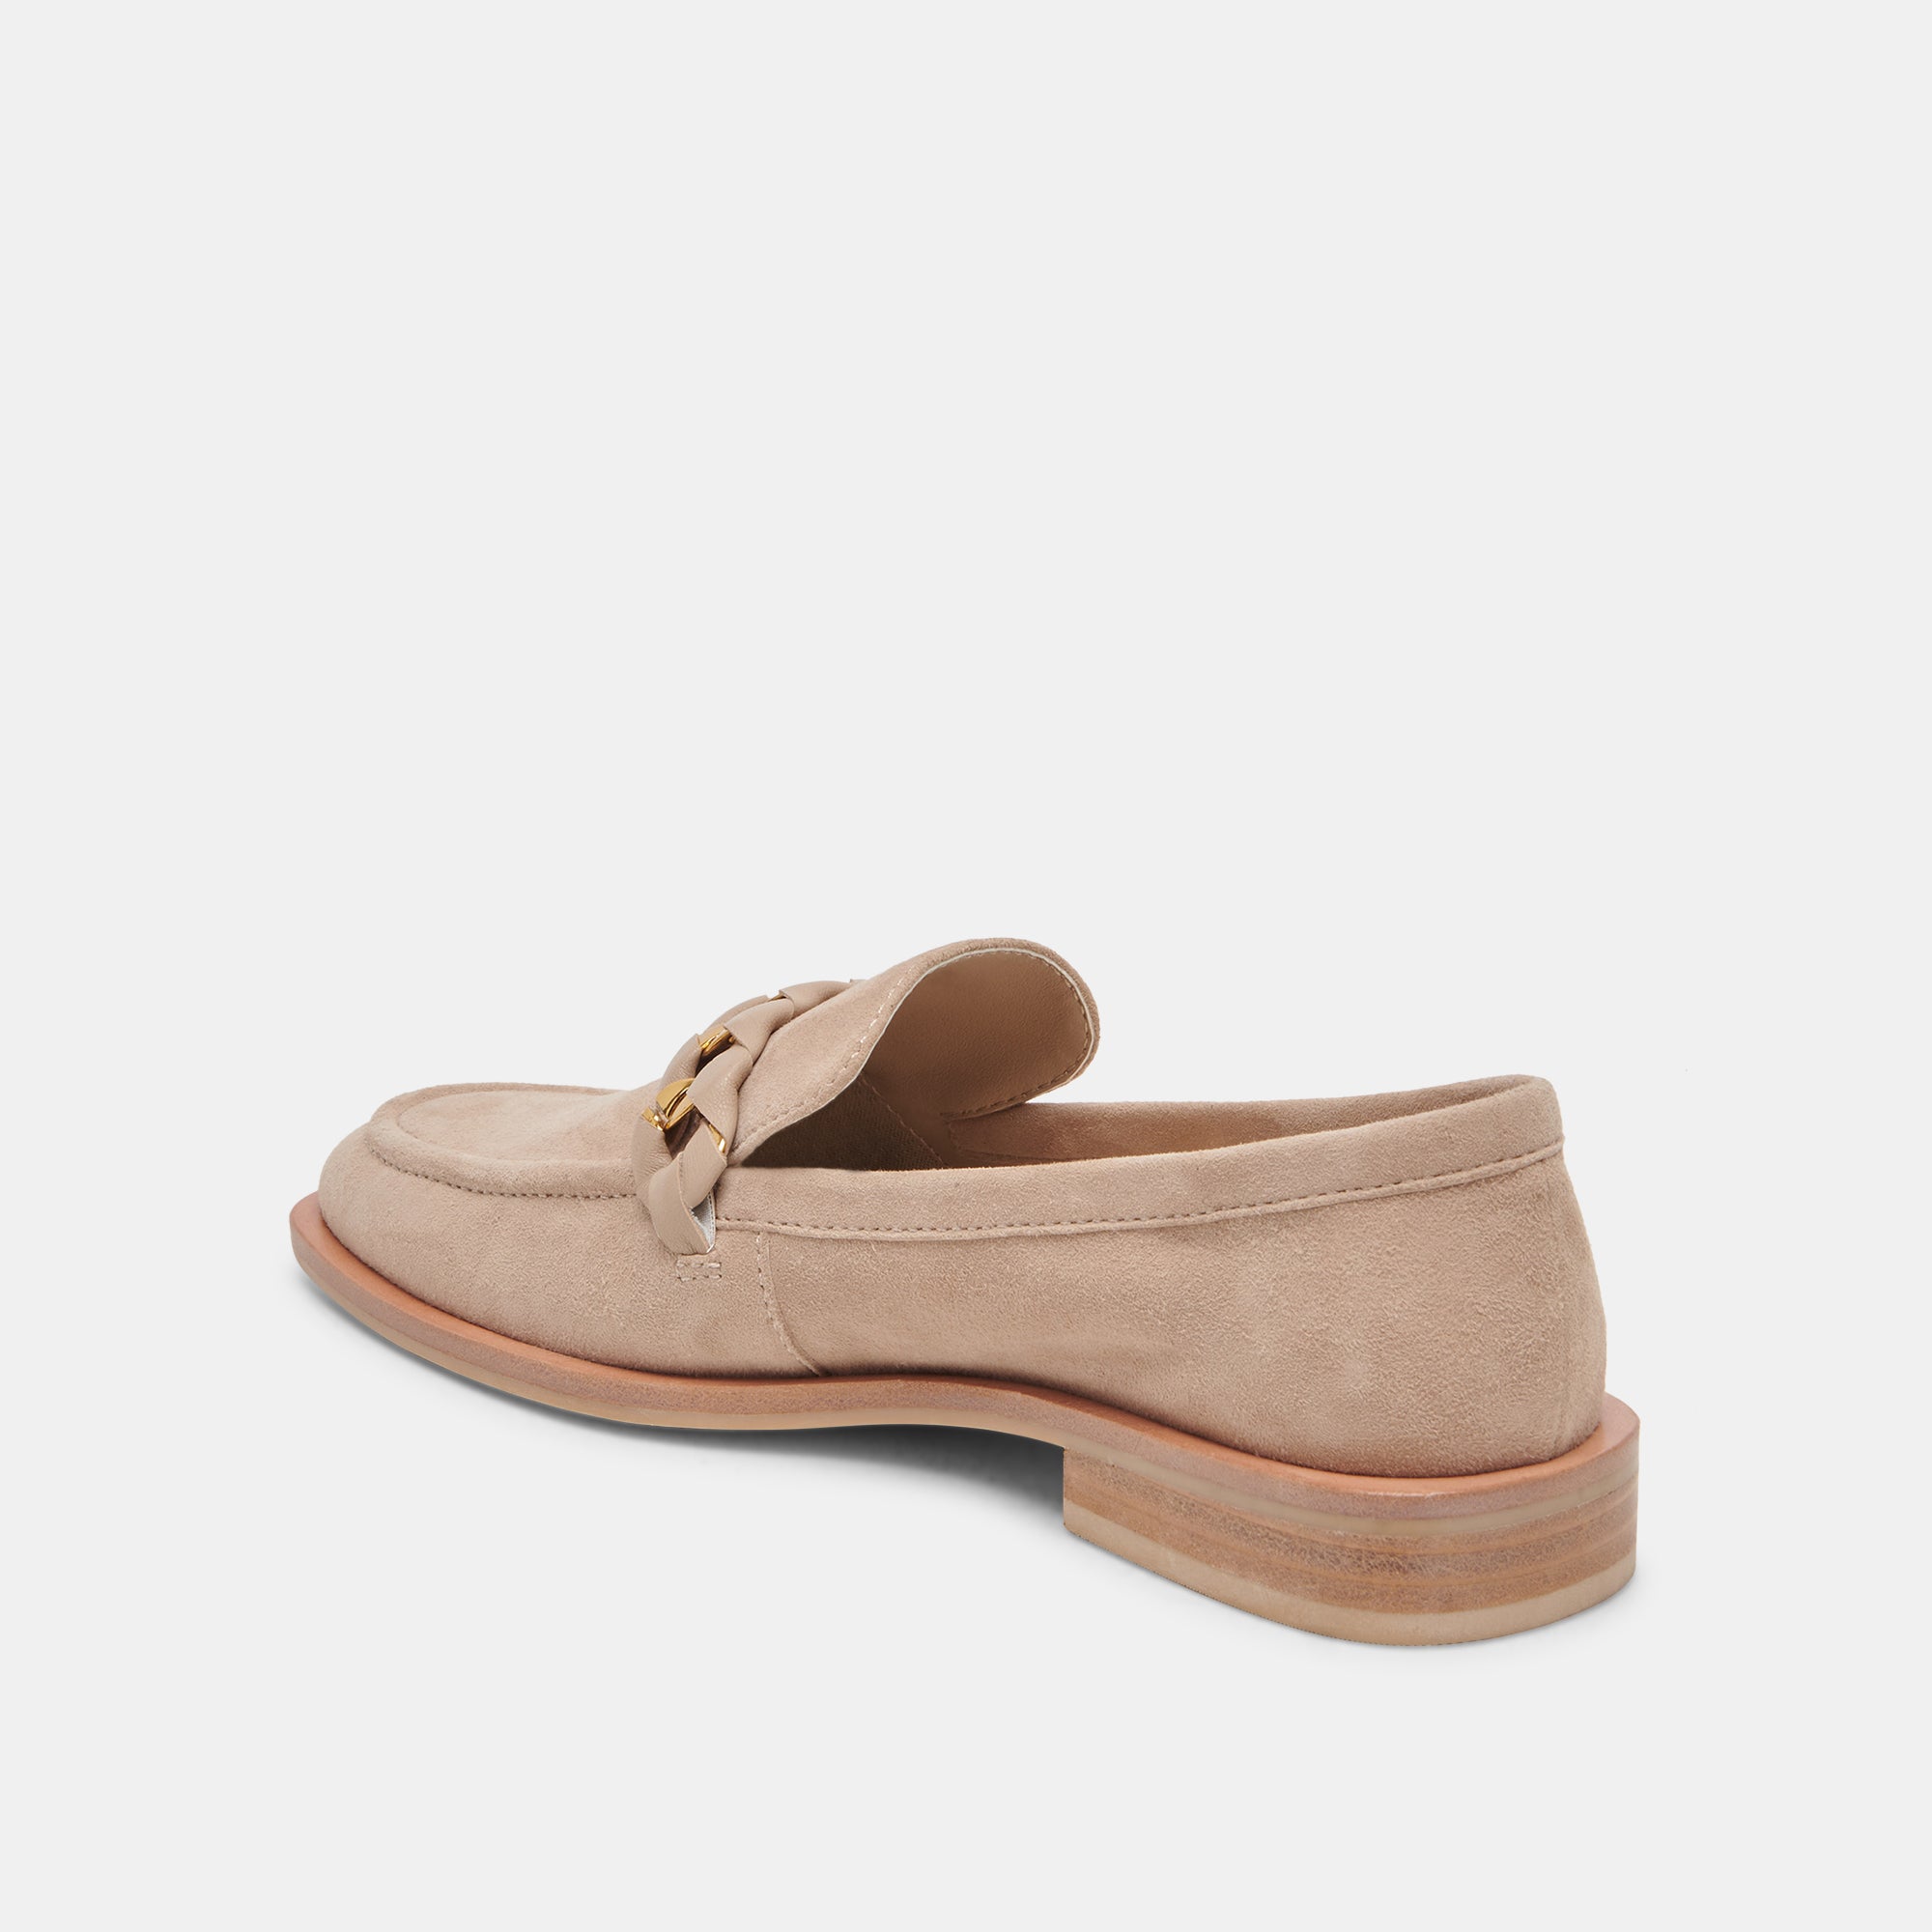 SALLIE FLATS TAUPE SUEDE – Dolce Vita